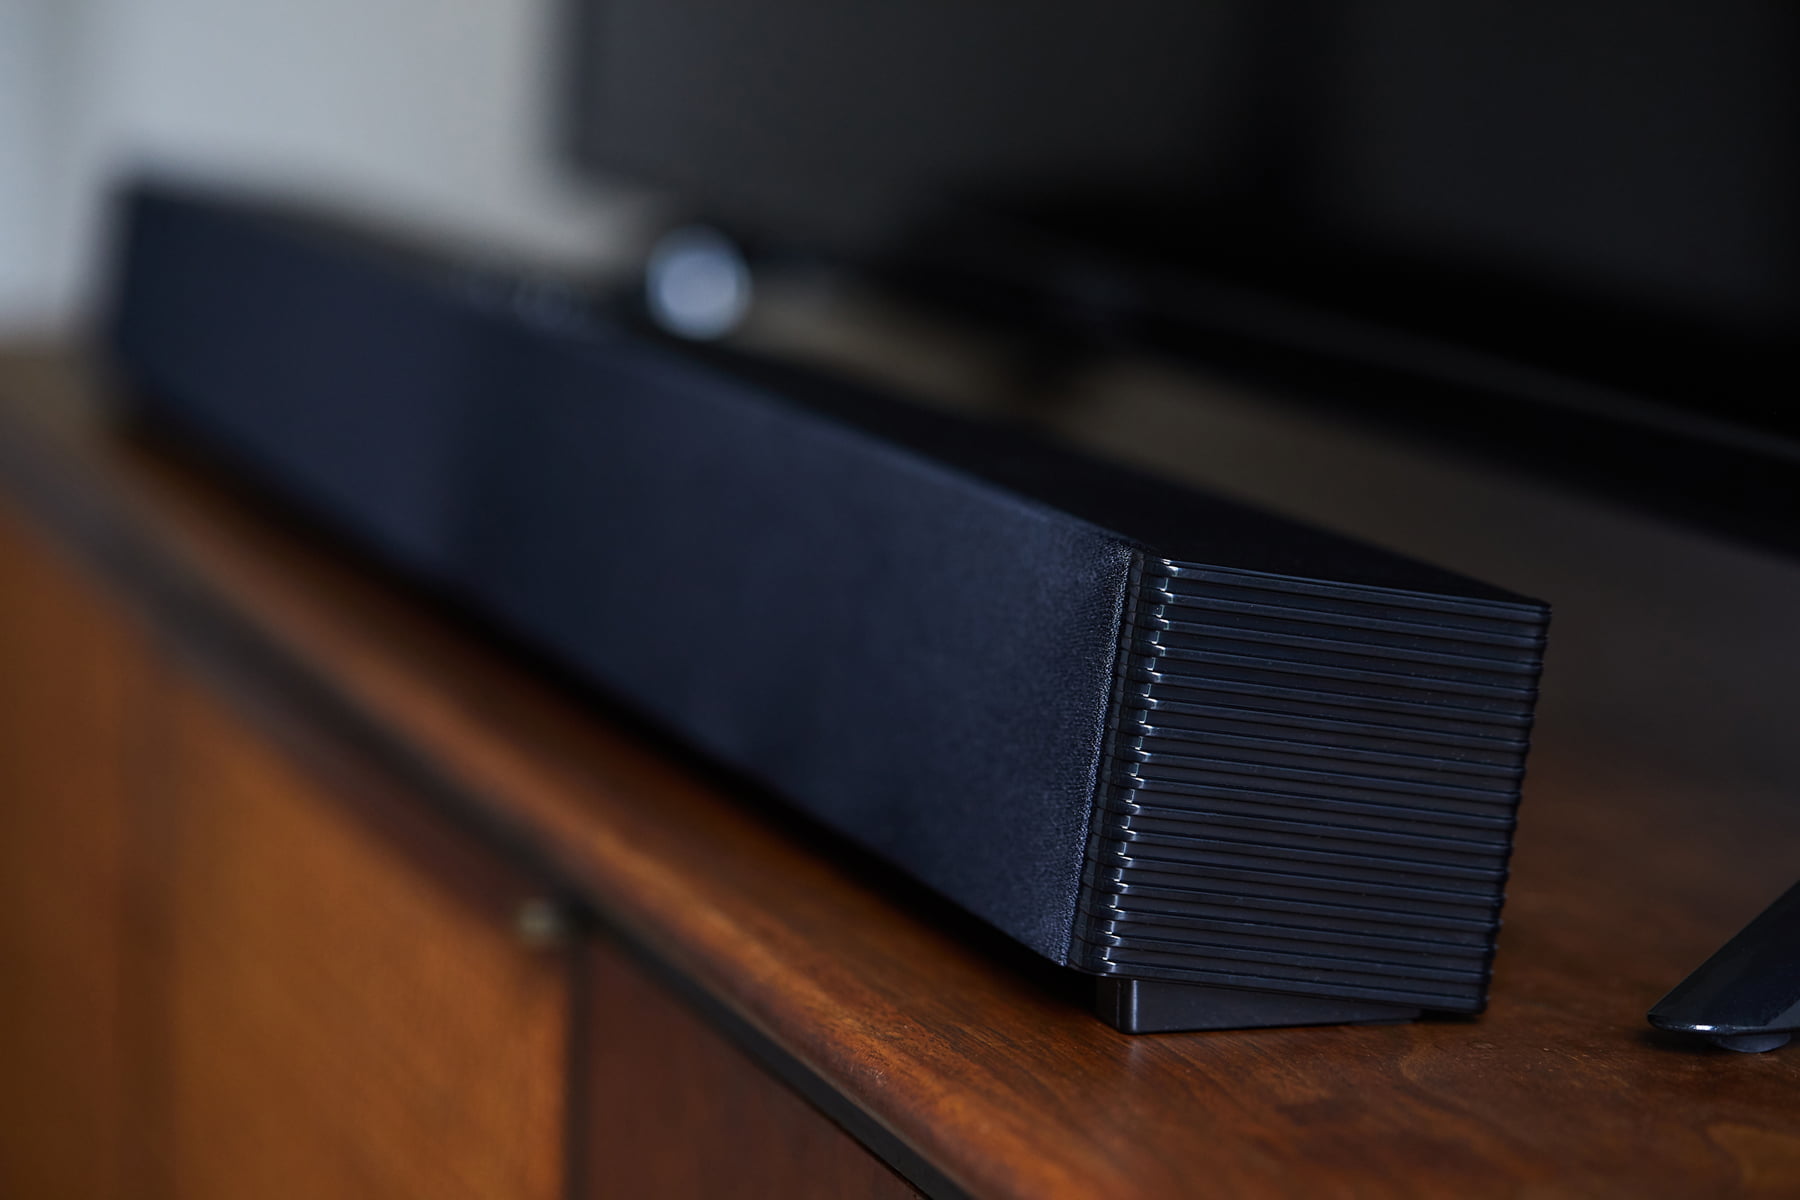 How To Pair Ilive 37 Hd Sound Bar Bluetooth Pairing